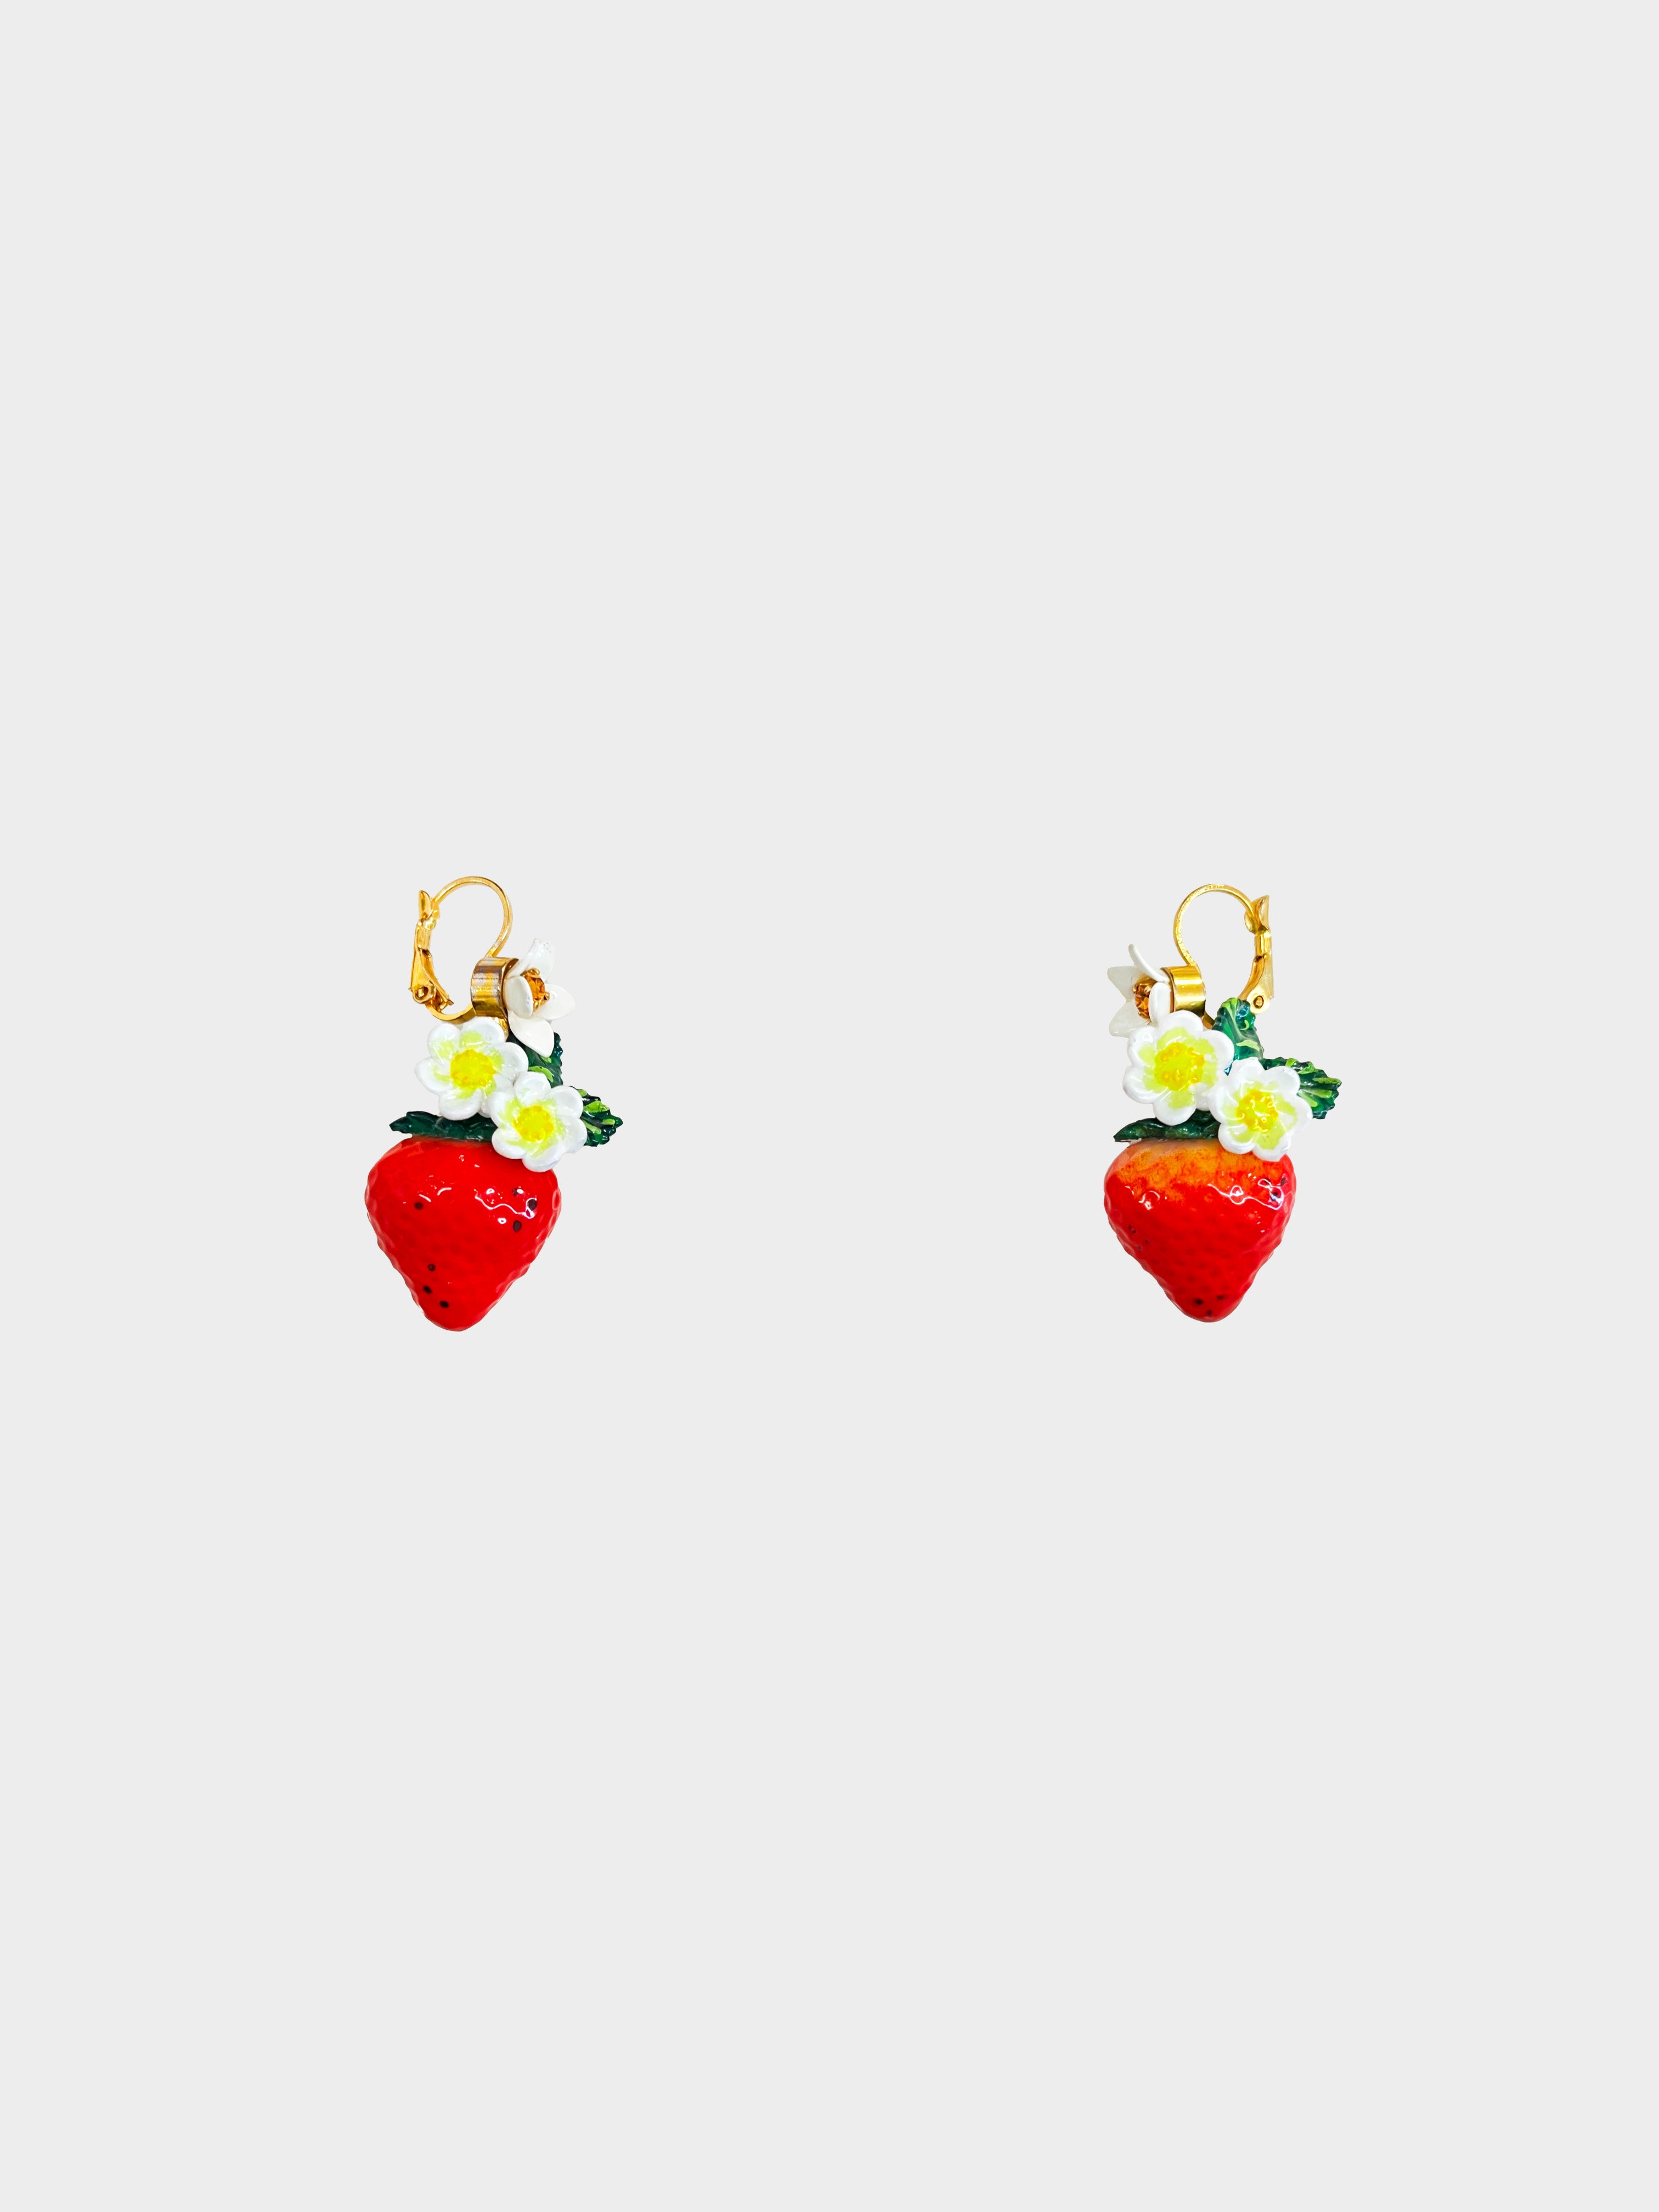 Dolce and Gabbana 2018 Strawberry Earrings